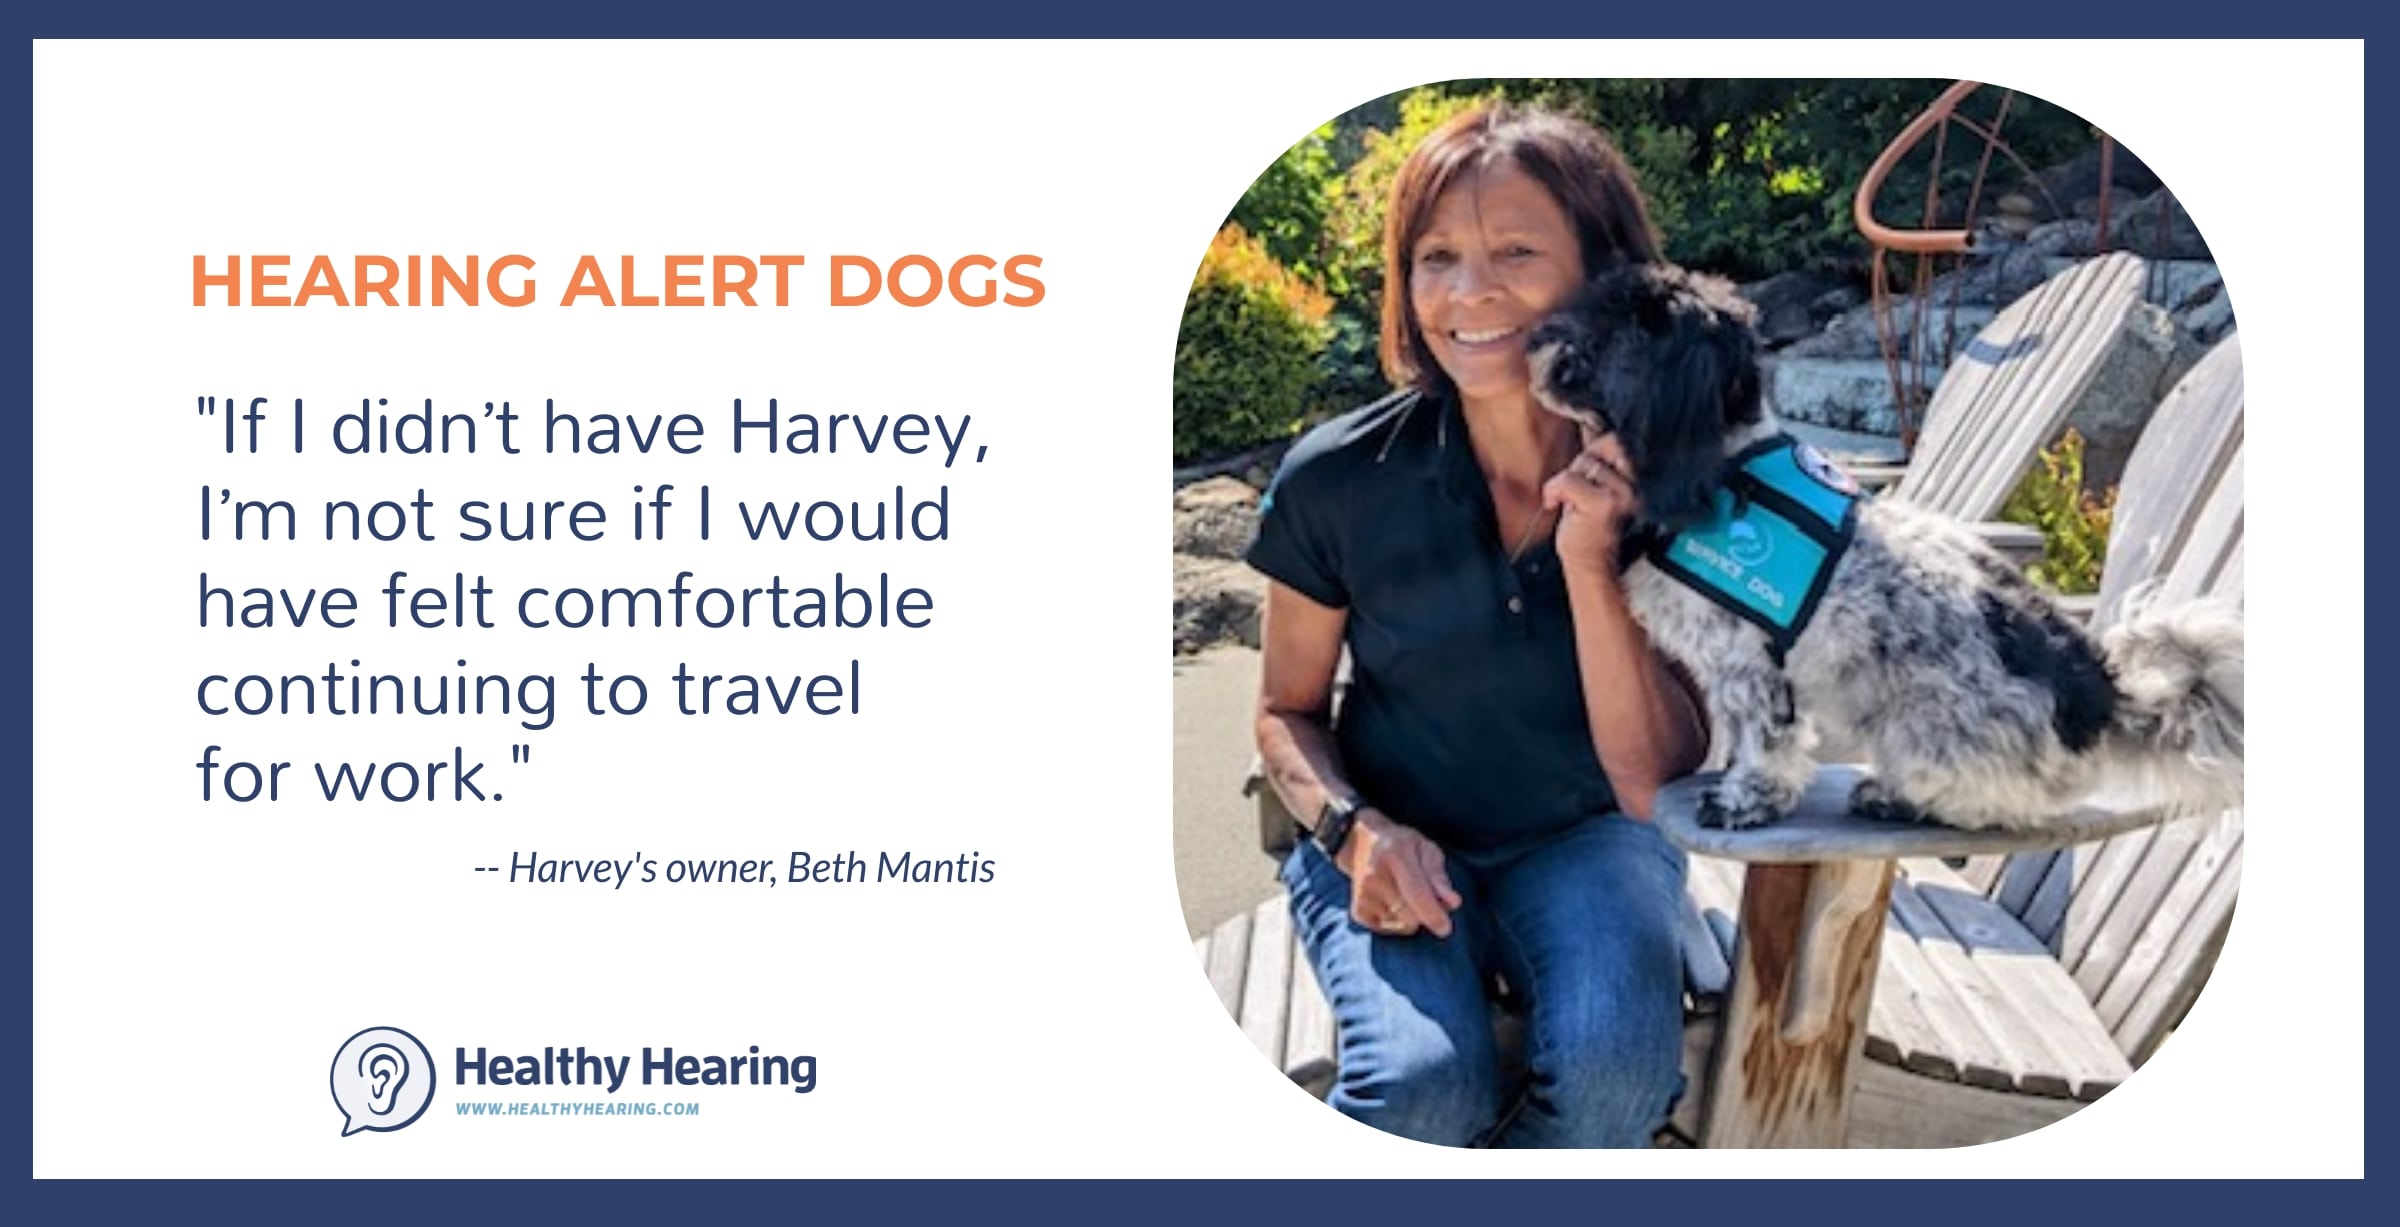 A quote from hearing alert dog owner: 